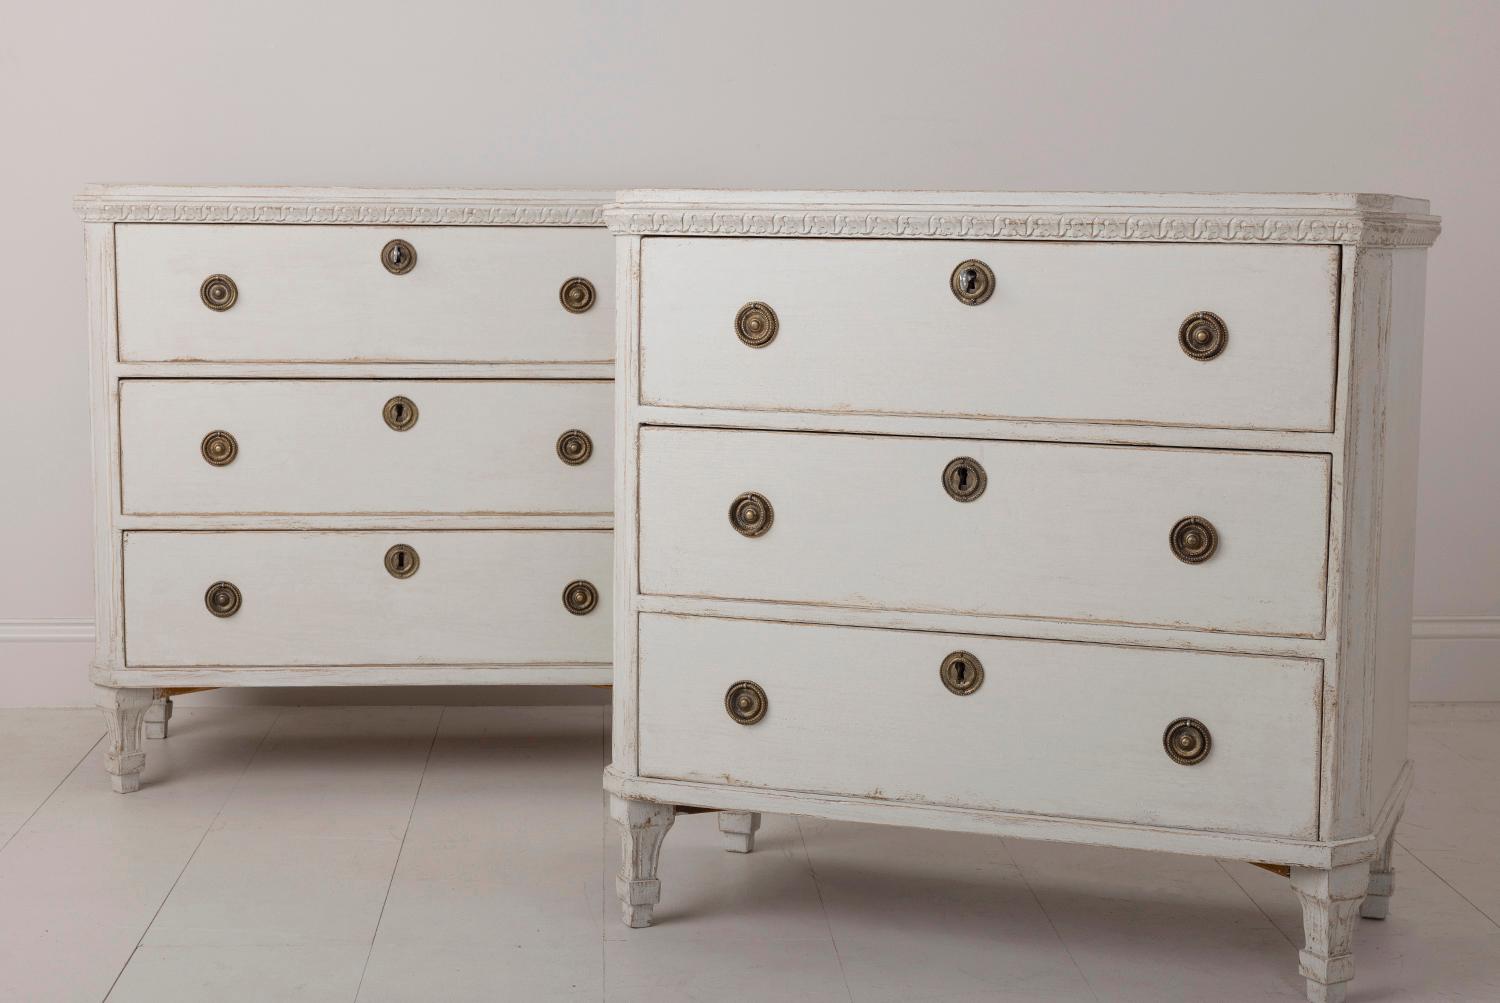 Hand-Carved Pair of Swedish Gustavian Style Painted Bedside Commodes